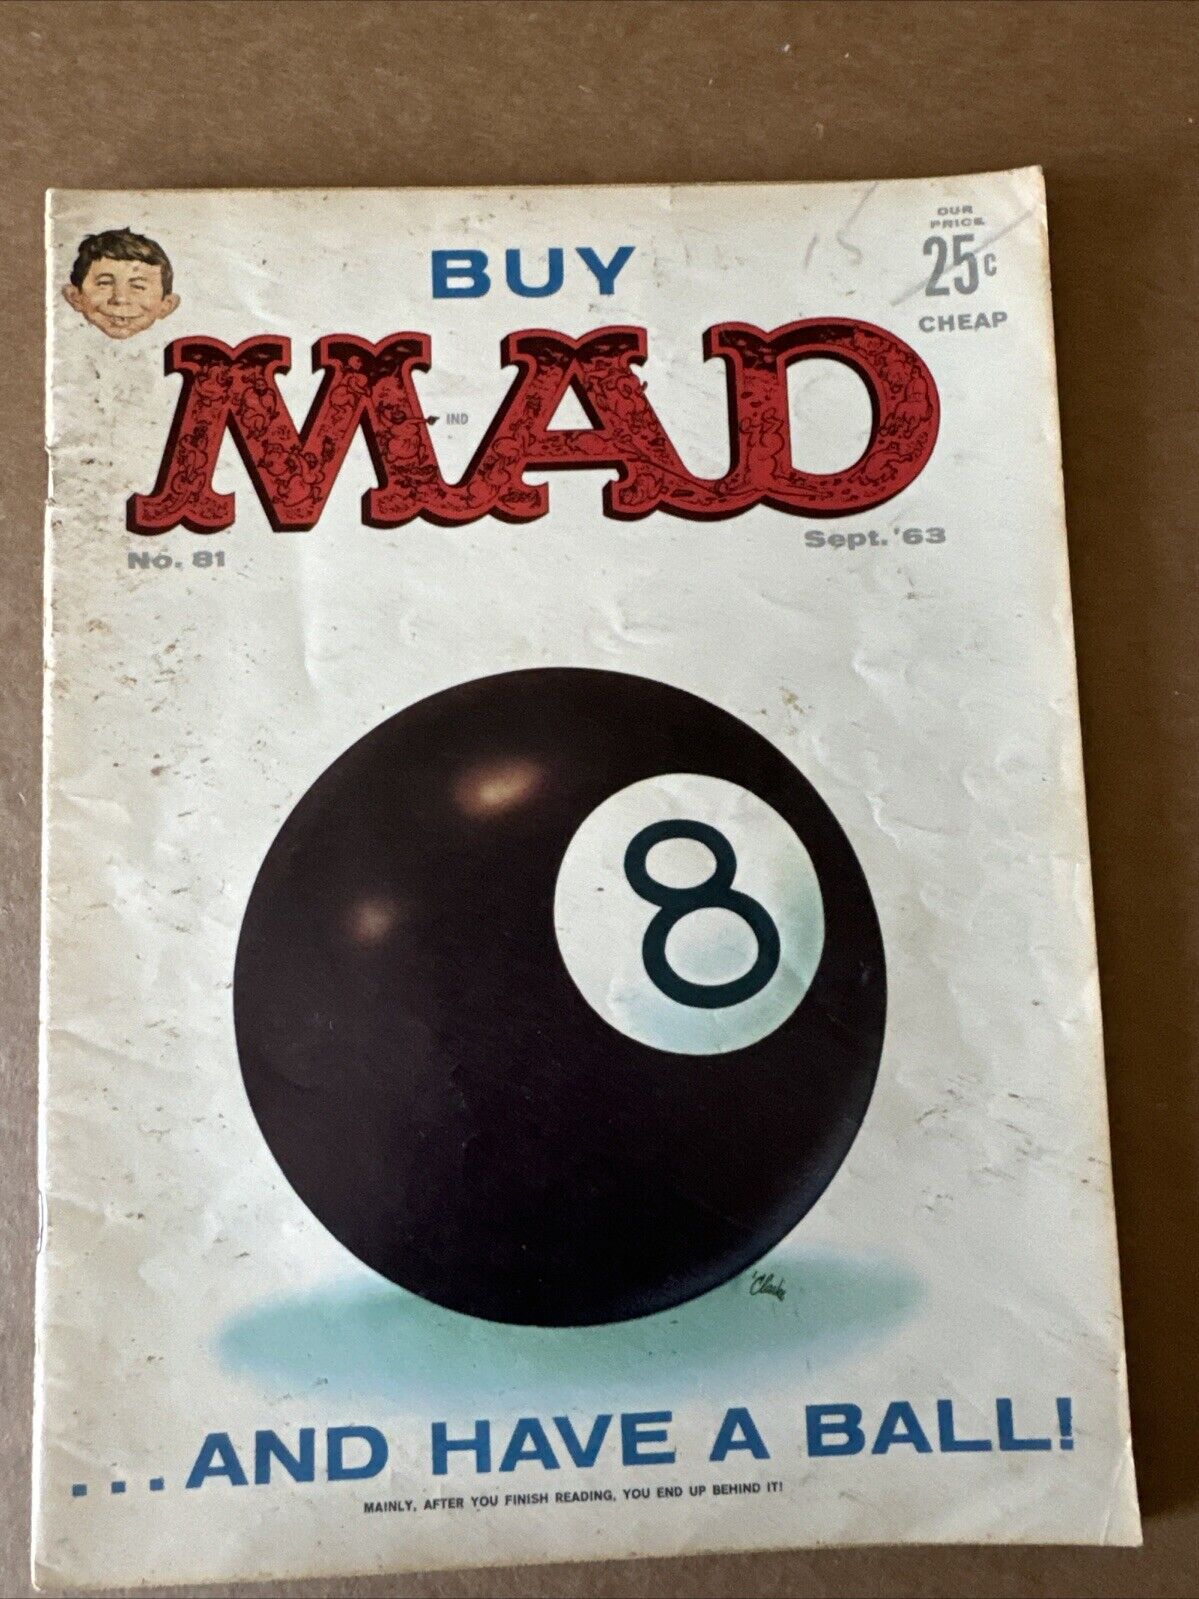 Mad Magazine #81 September 1963 8 Ball Good shipping included